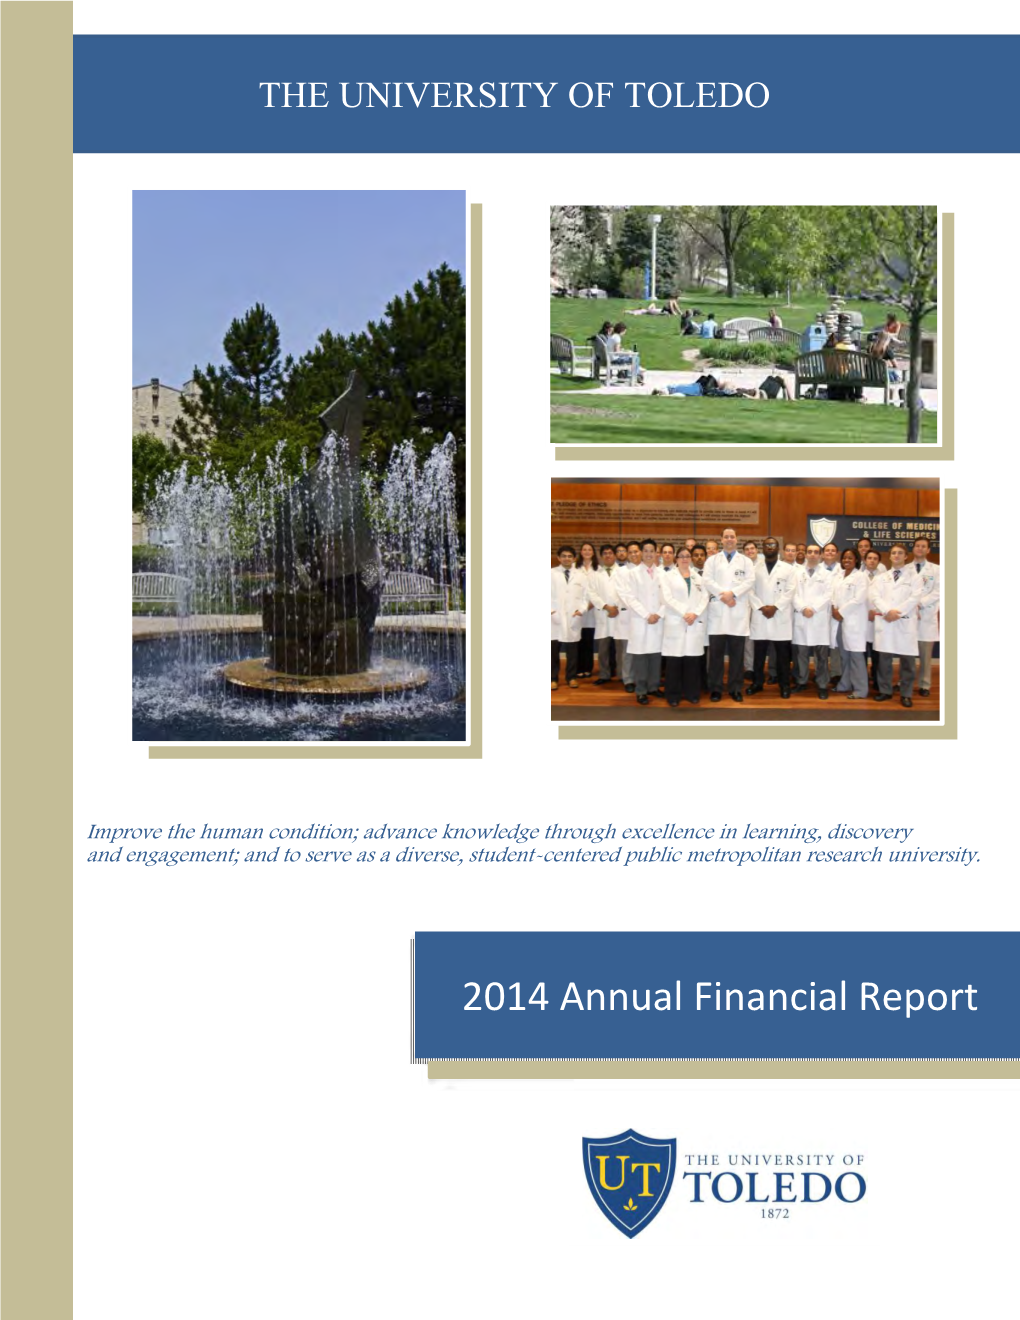 FY2014 Annual Financial Report